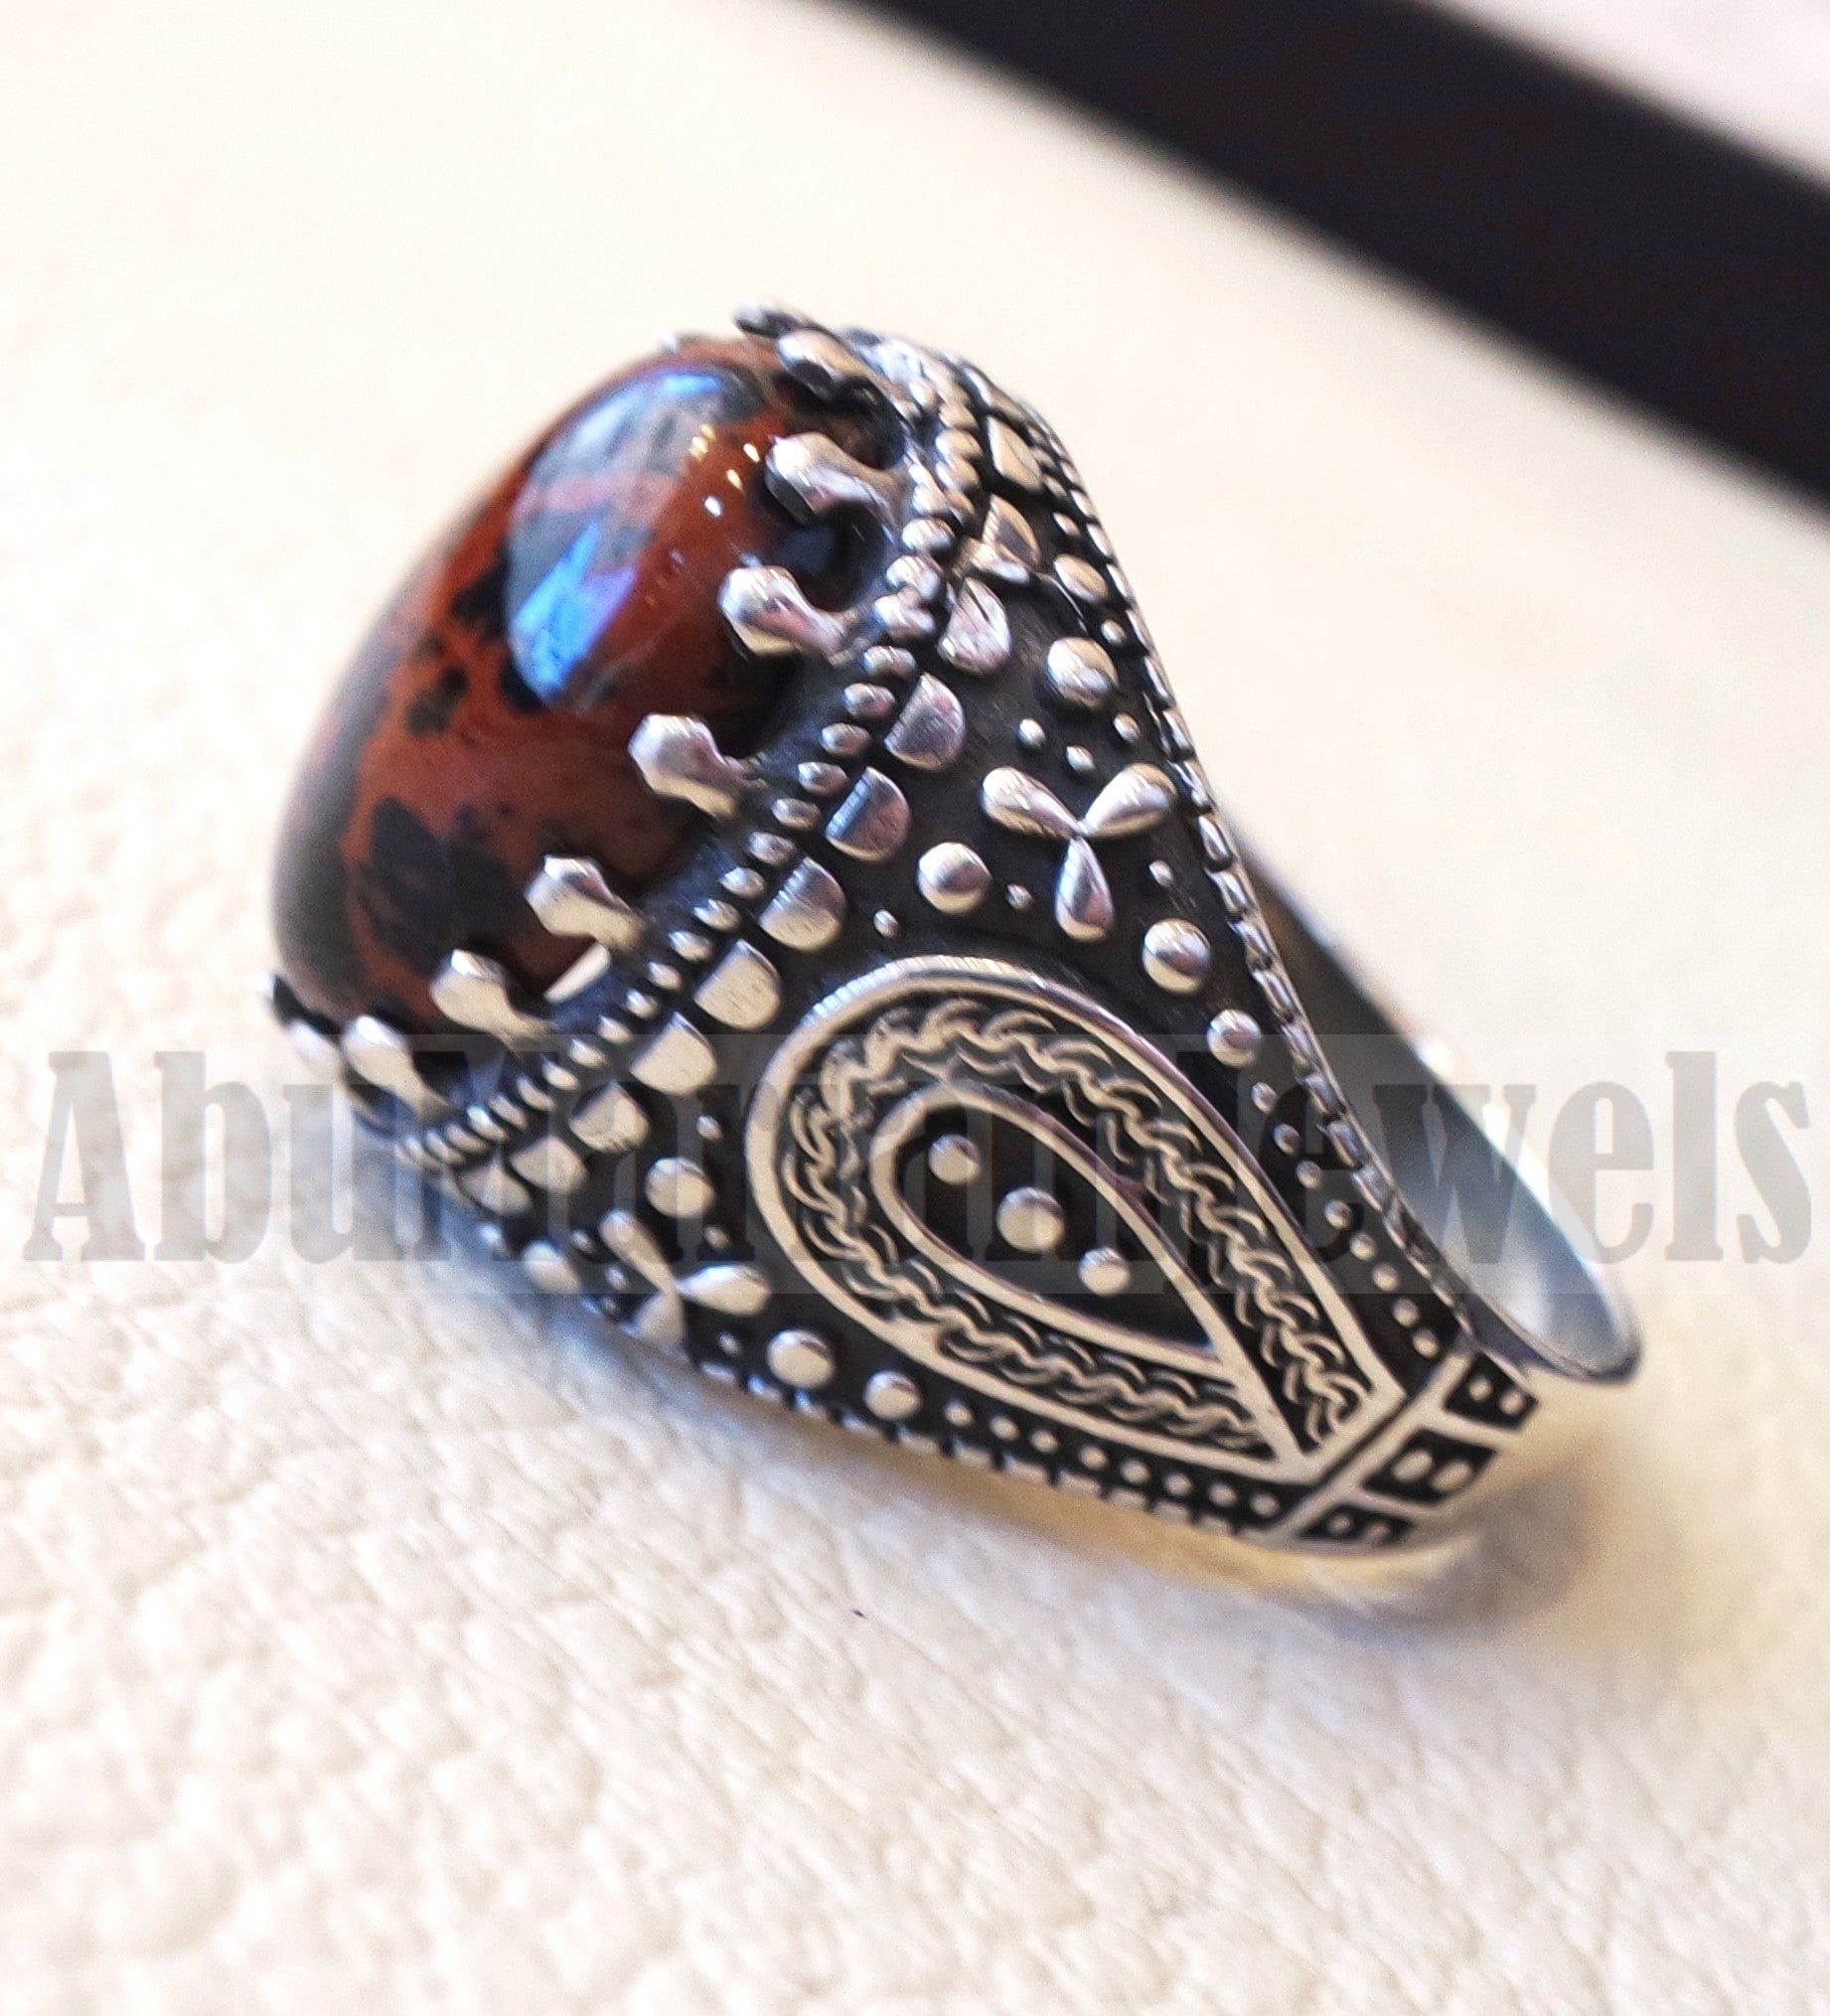 mahagony obsidian man ring stone natural gem sterling silver 925 ring brown and black oval semi precious cabochon jewelry protective stone